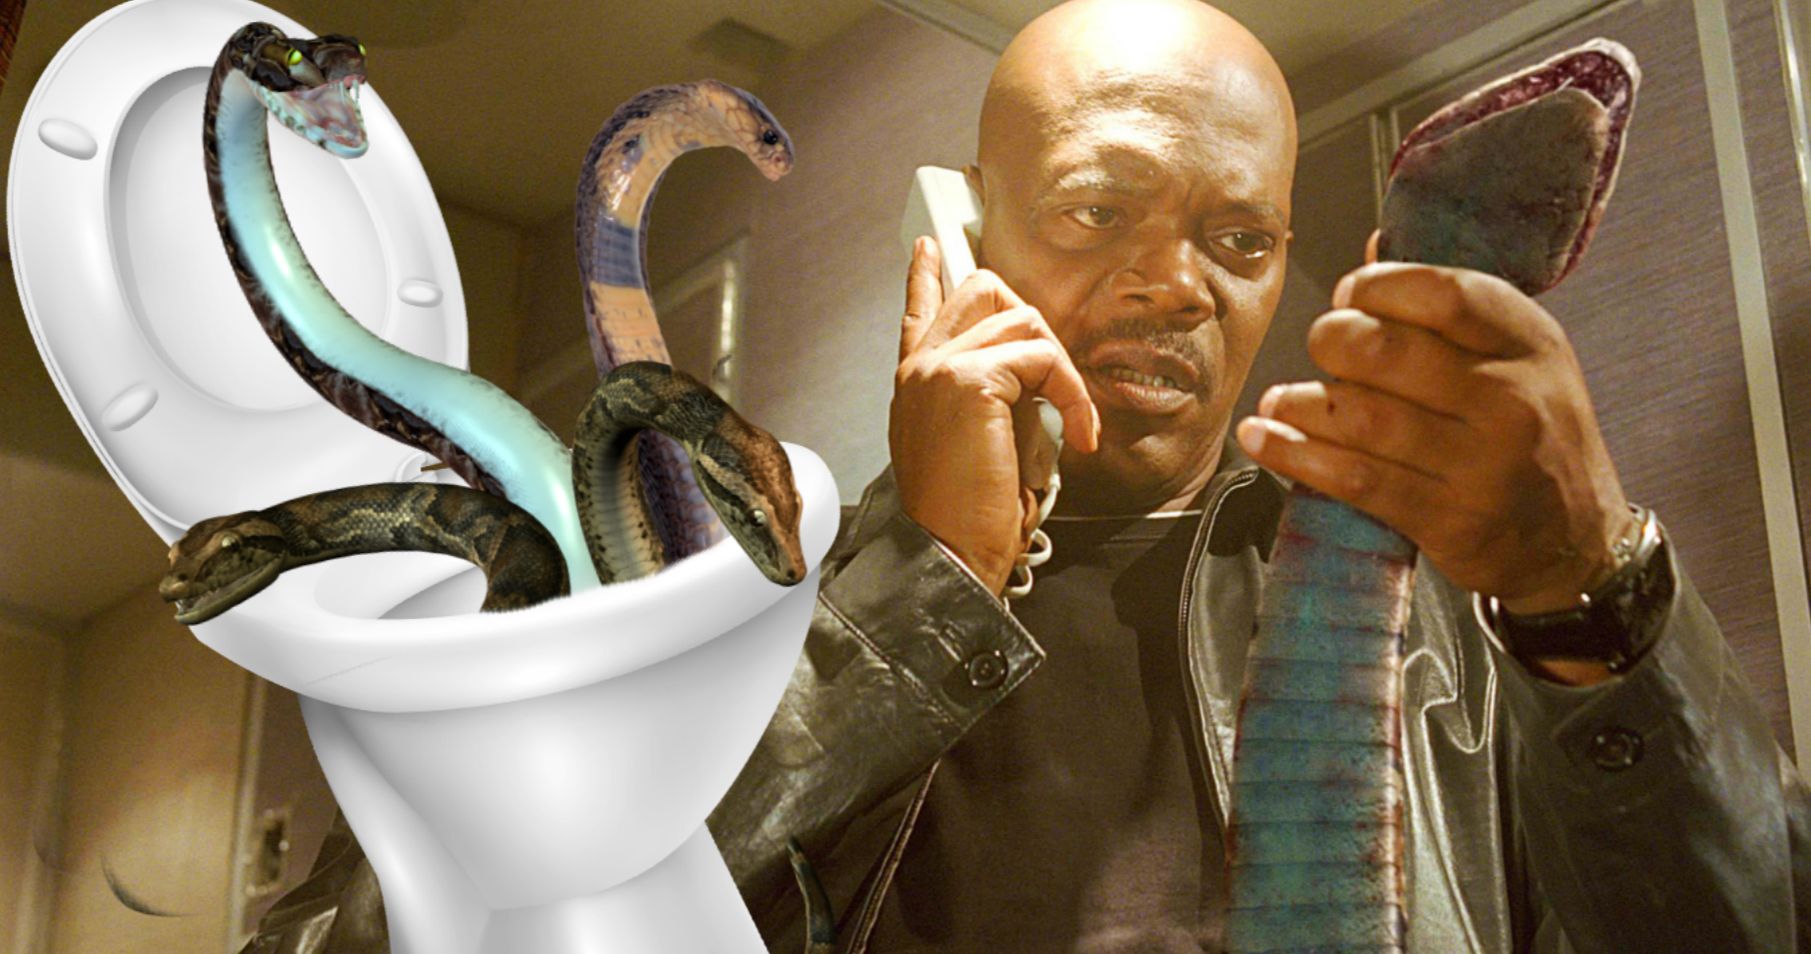 Unflushable Toilet Reveals Real-Life Snake Nightmare, Someone Call Samuel L. Jackson